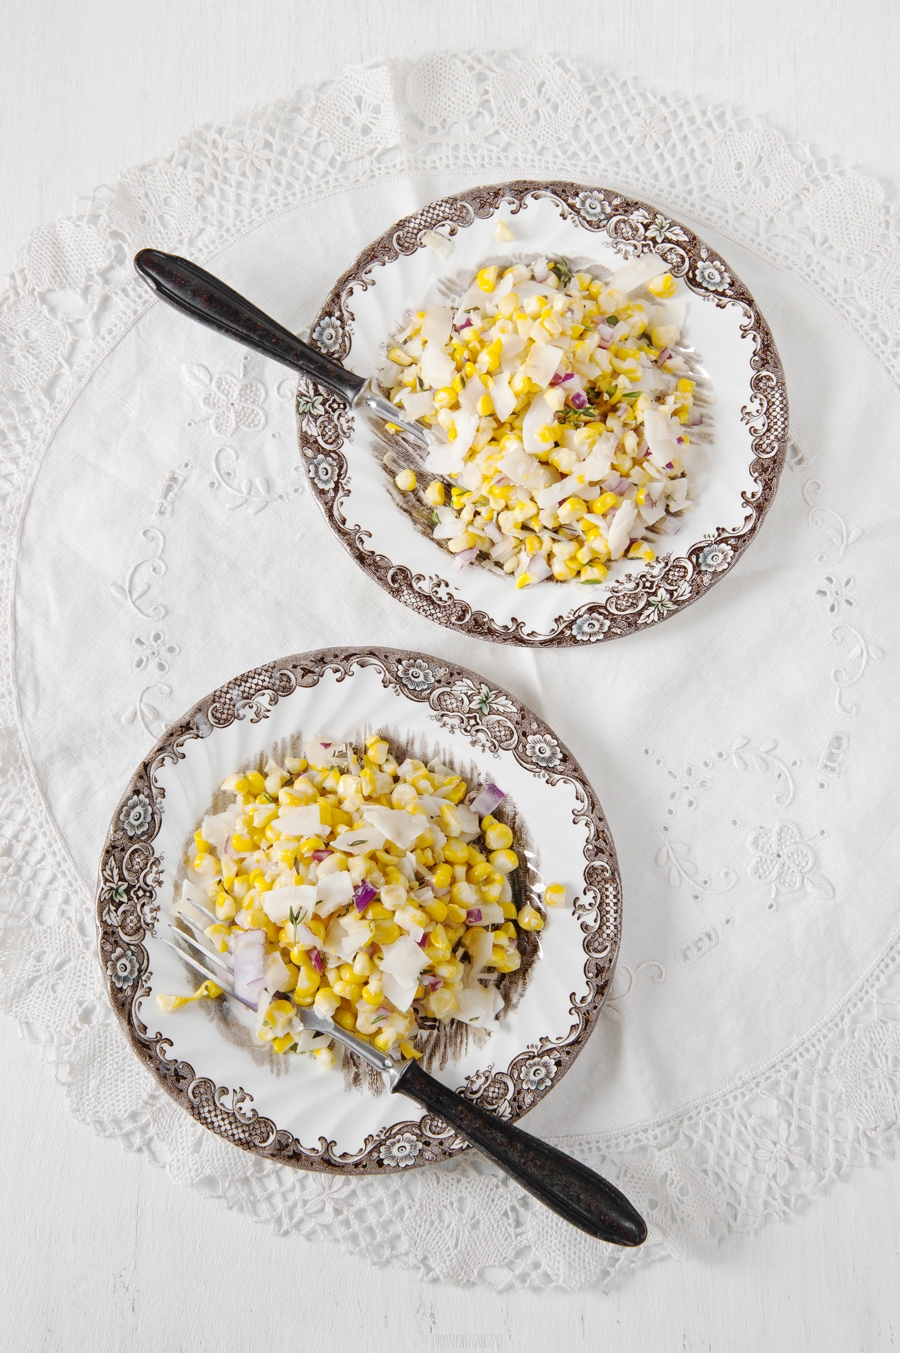 Sweetcorn salad with coconut & thyme